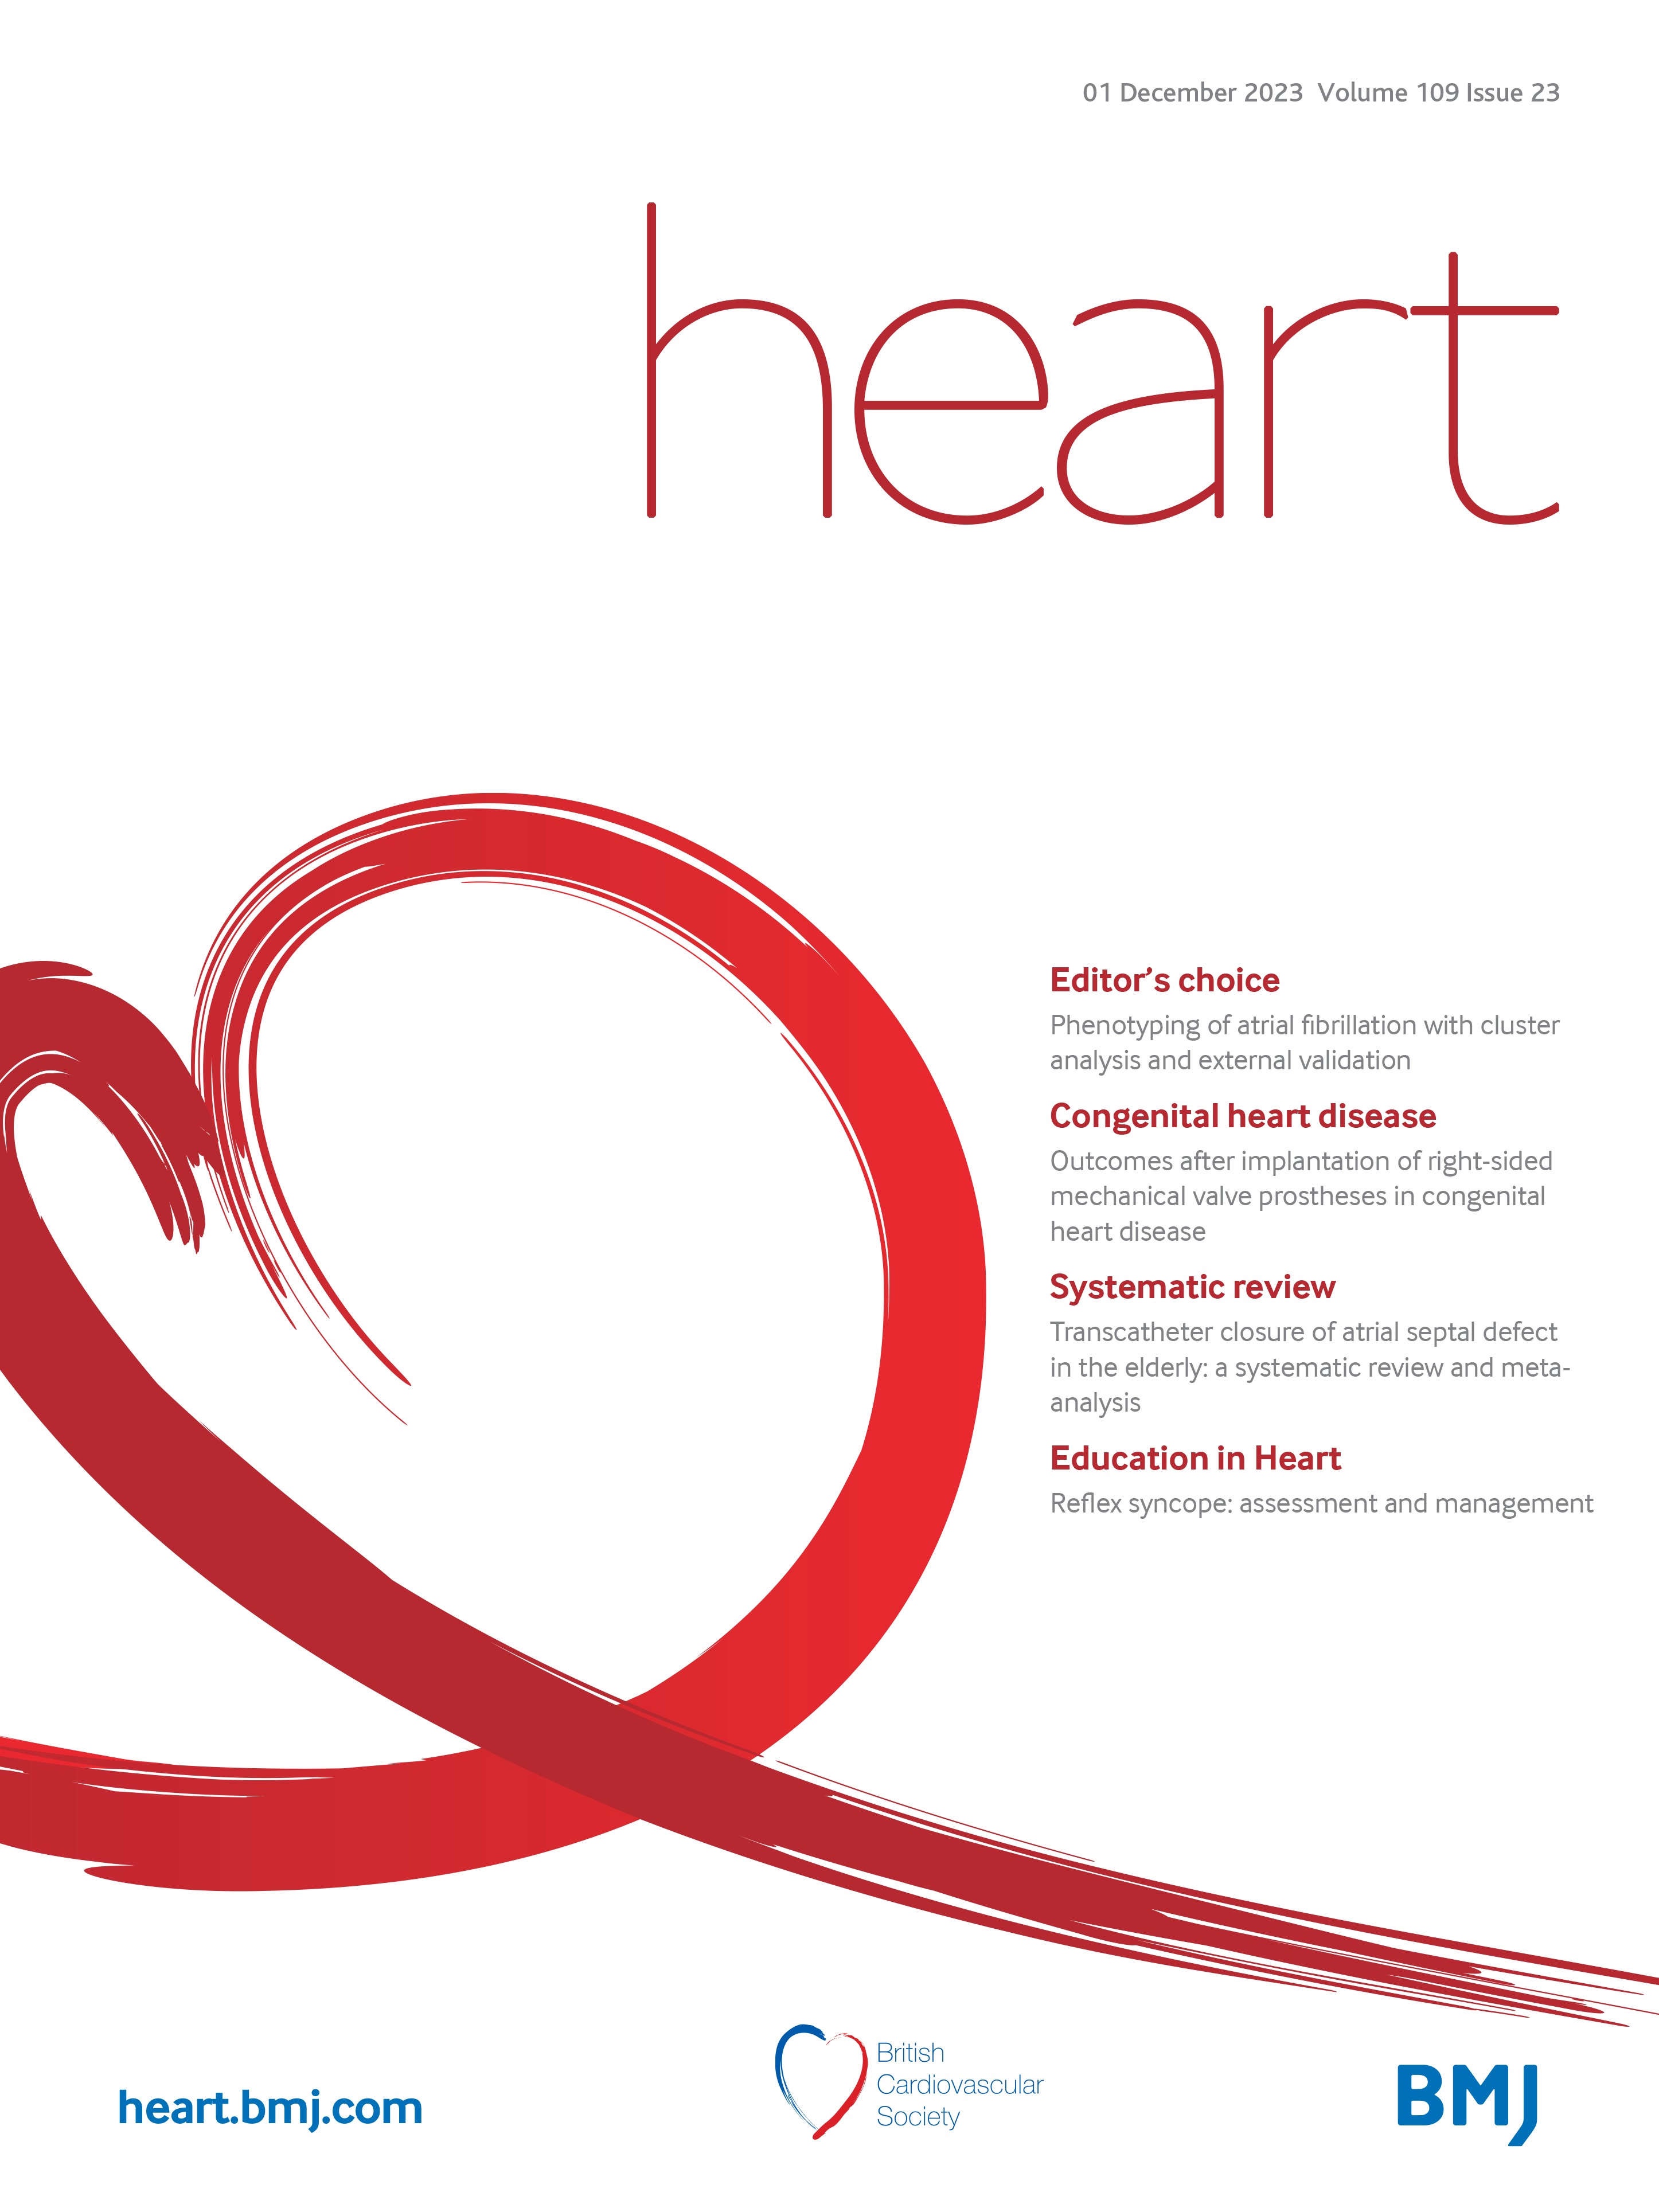 Heartbeat: atrial fibrillation phenotyping identifies patients at high risk of adverse events